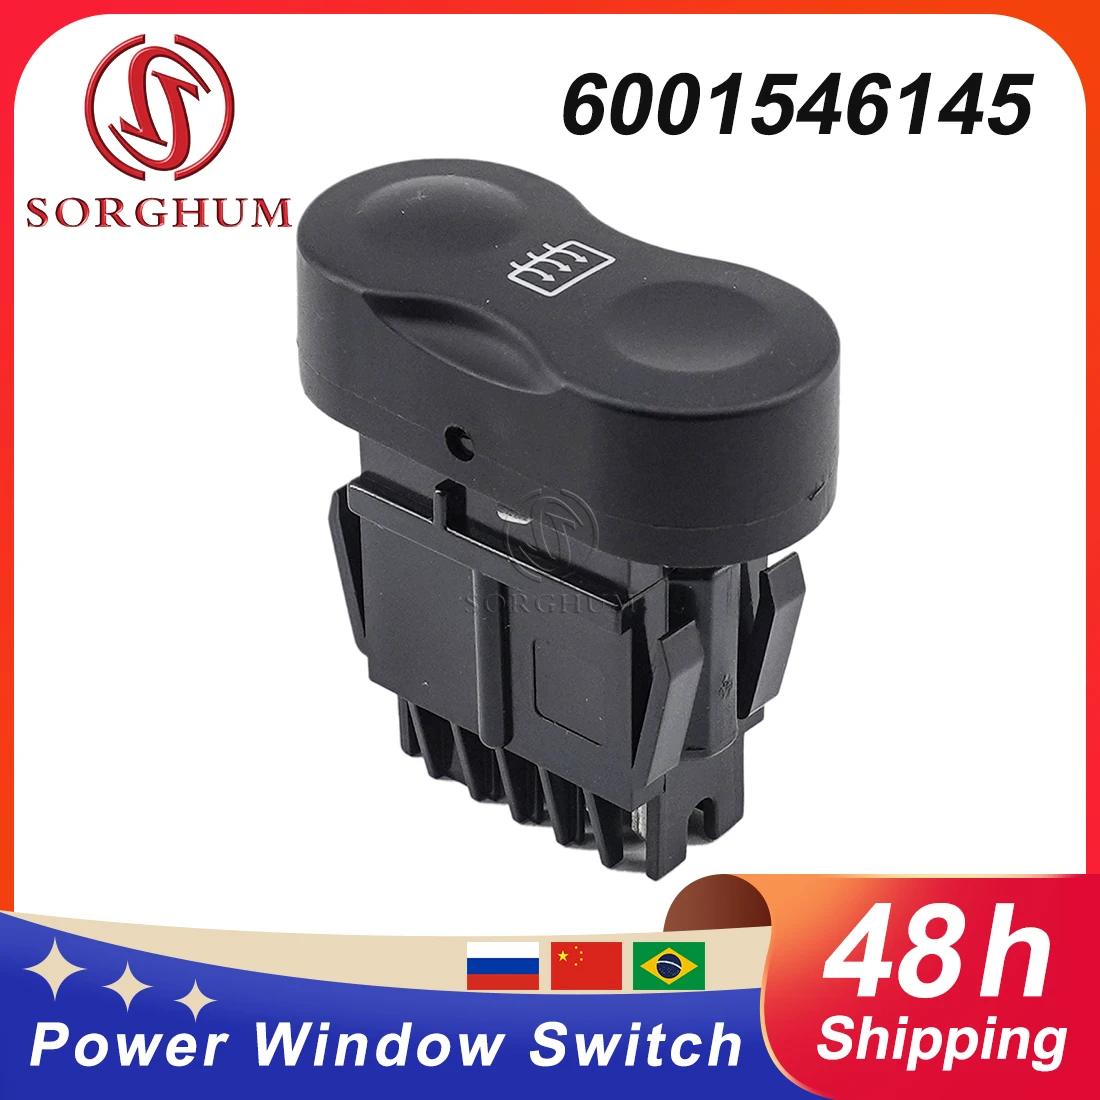 

Sorghum Car accessories New Rear Window Defrost Switch Button 4 Pins For Renault Dacia Logan 2008-2021 60015-46145 6001546145